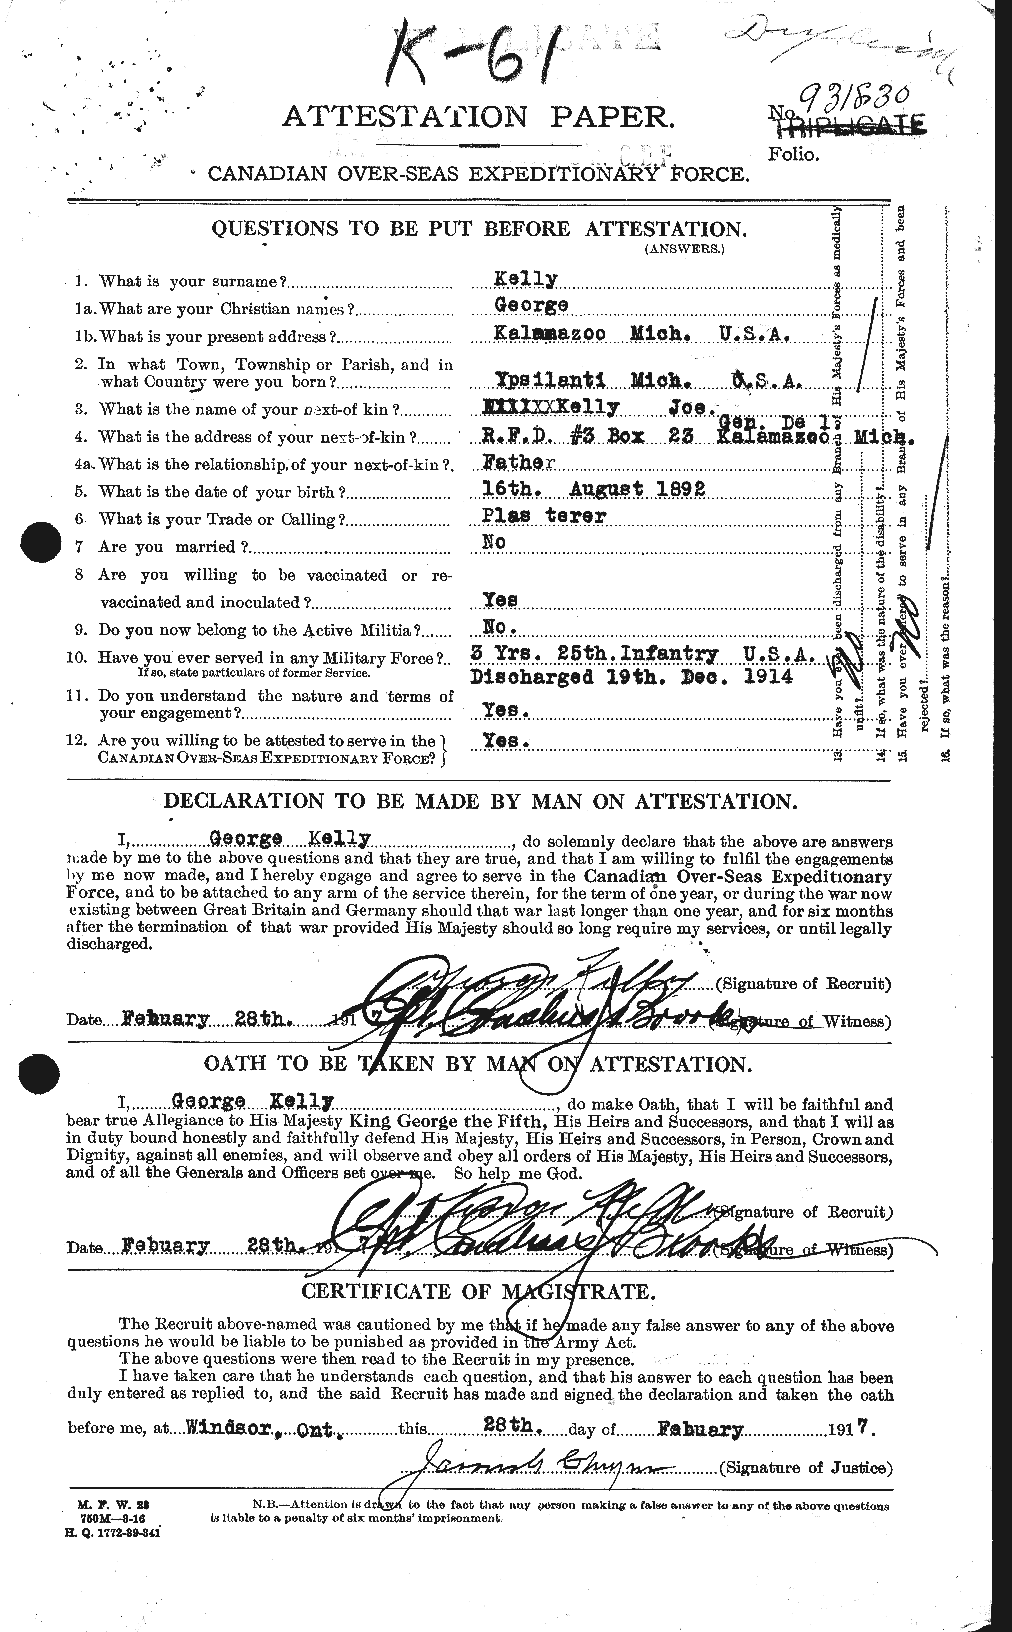 Personnel Records of the First World War - CEF 431464a